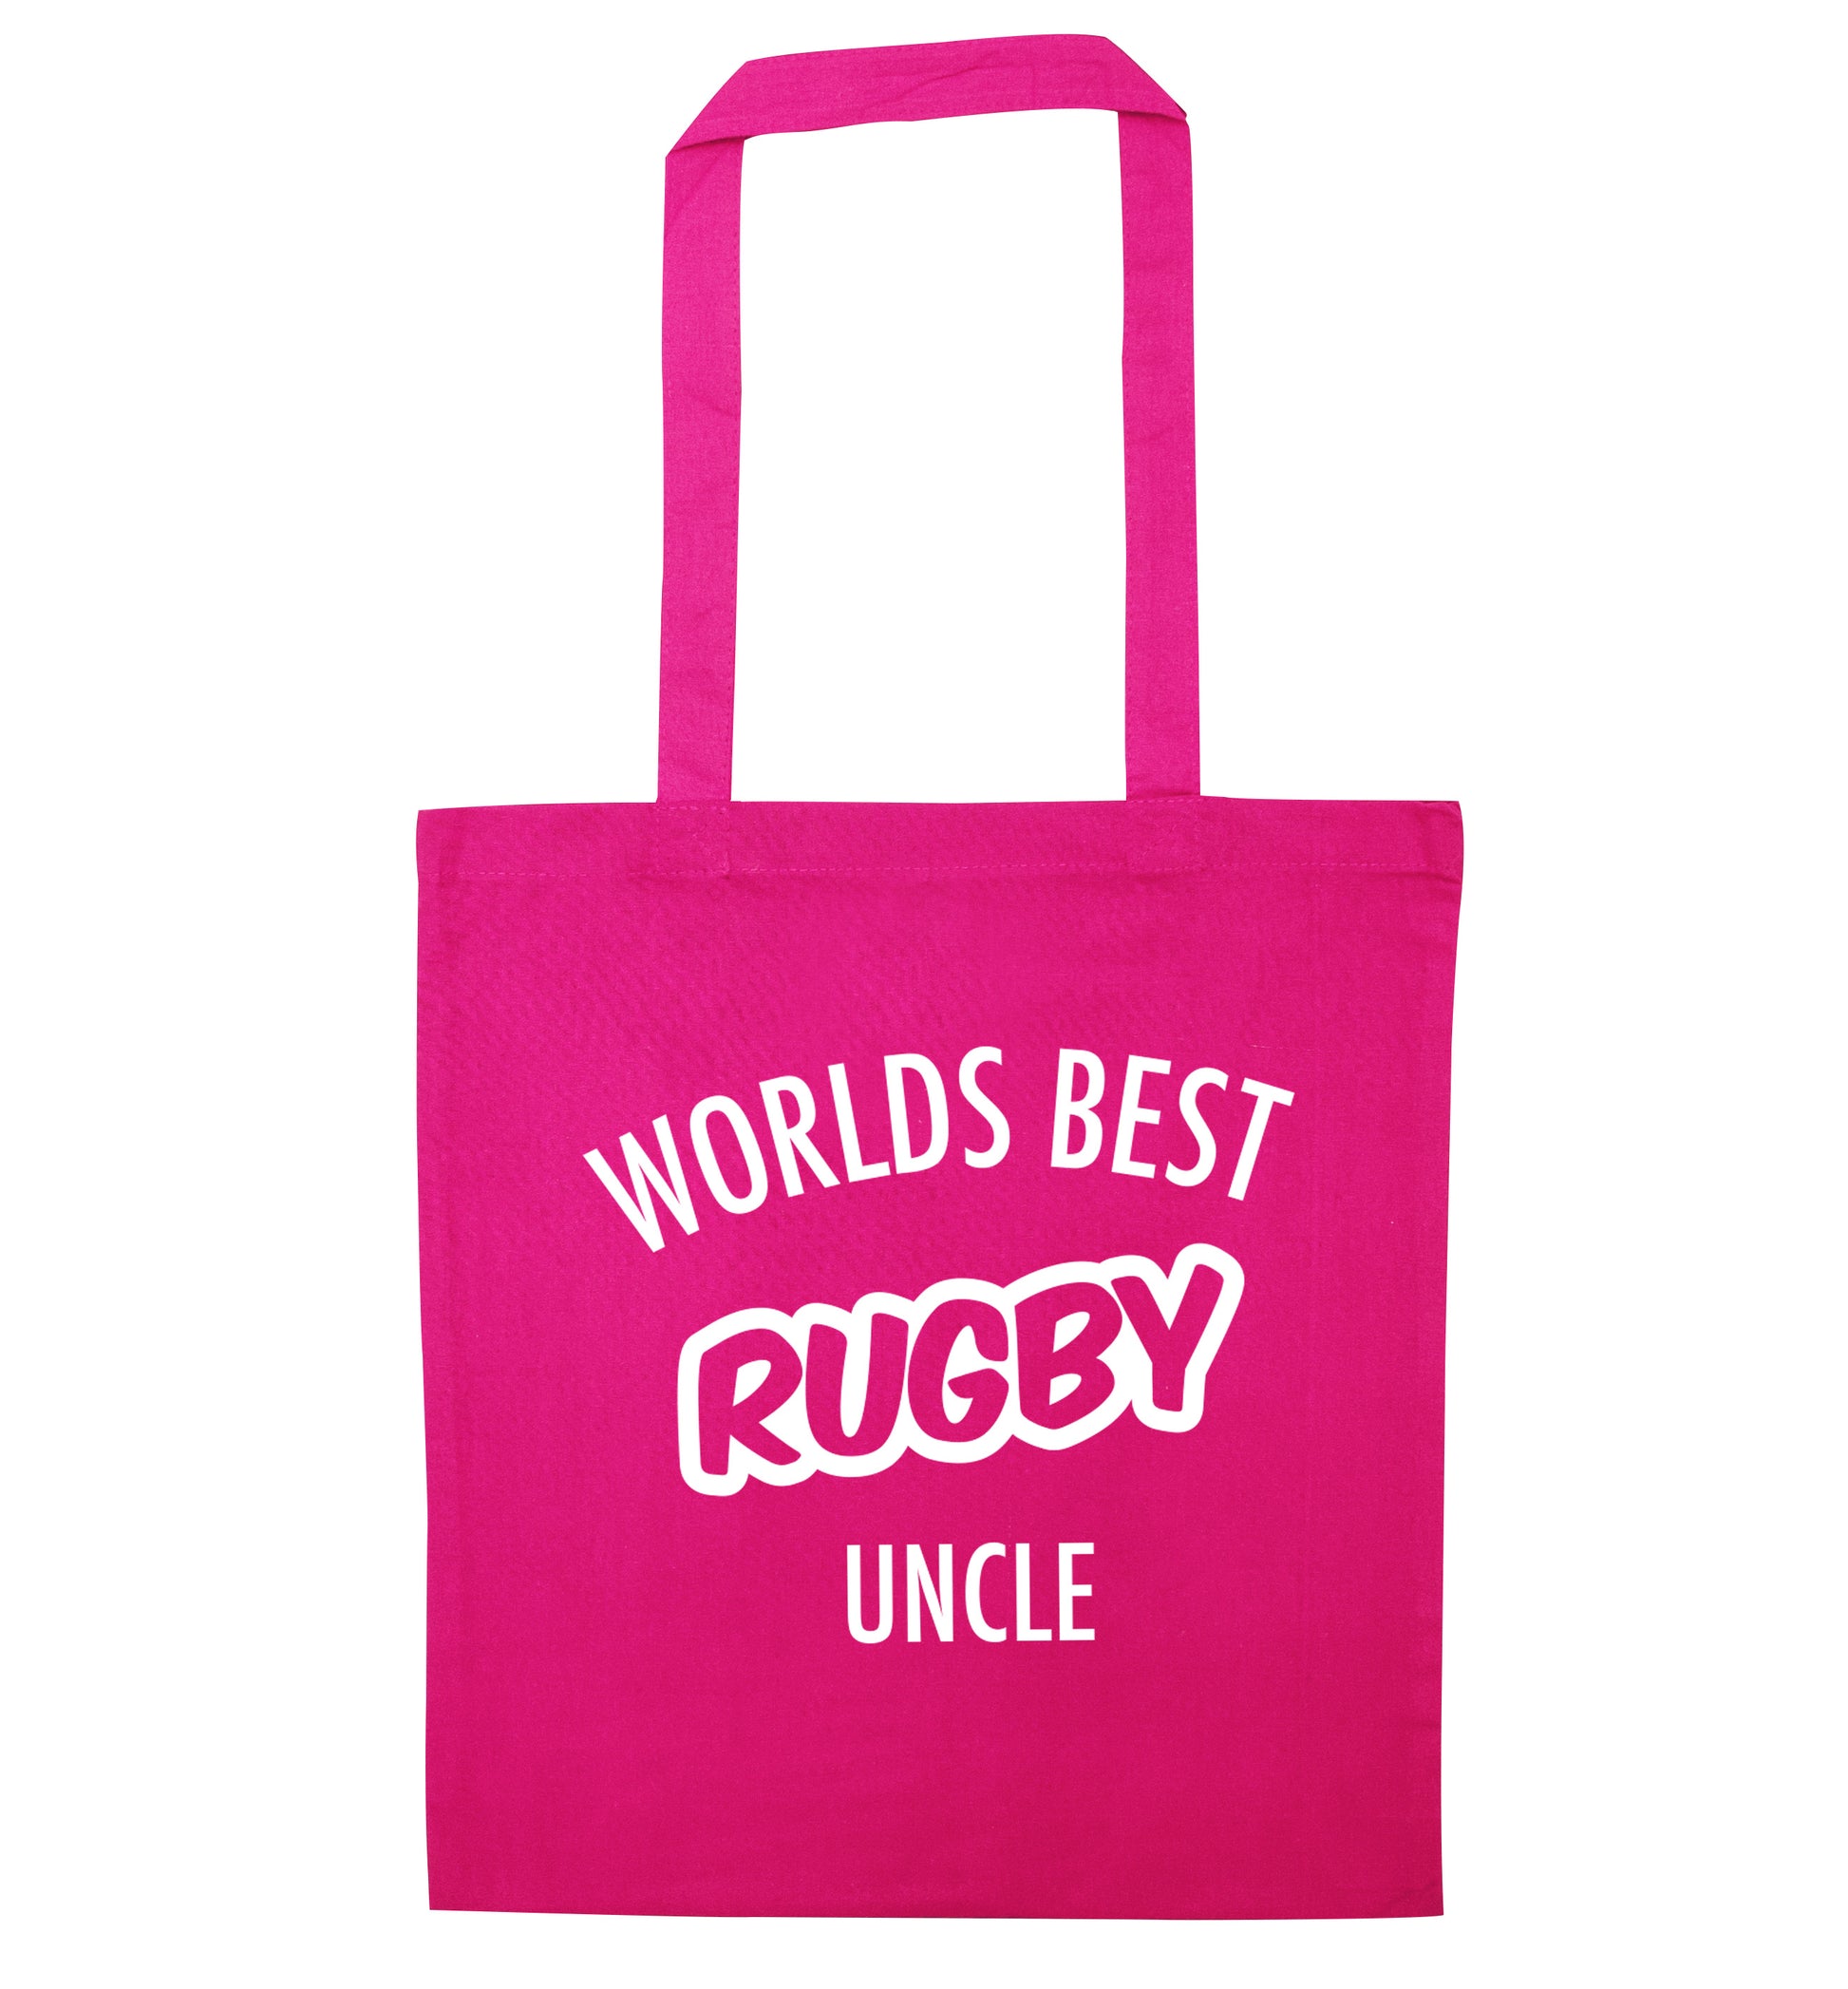 Worlds best rugby uncle pink tote bag